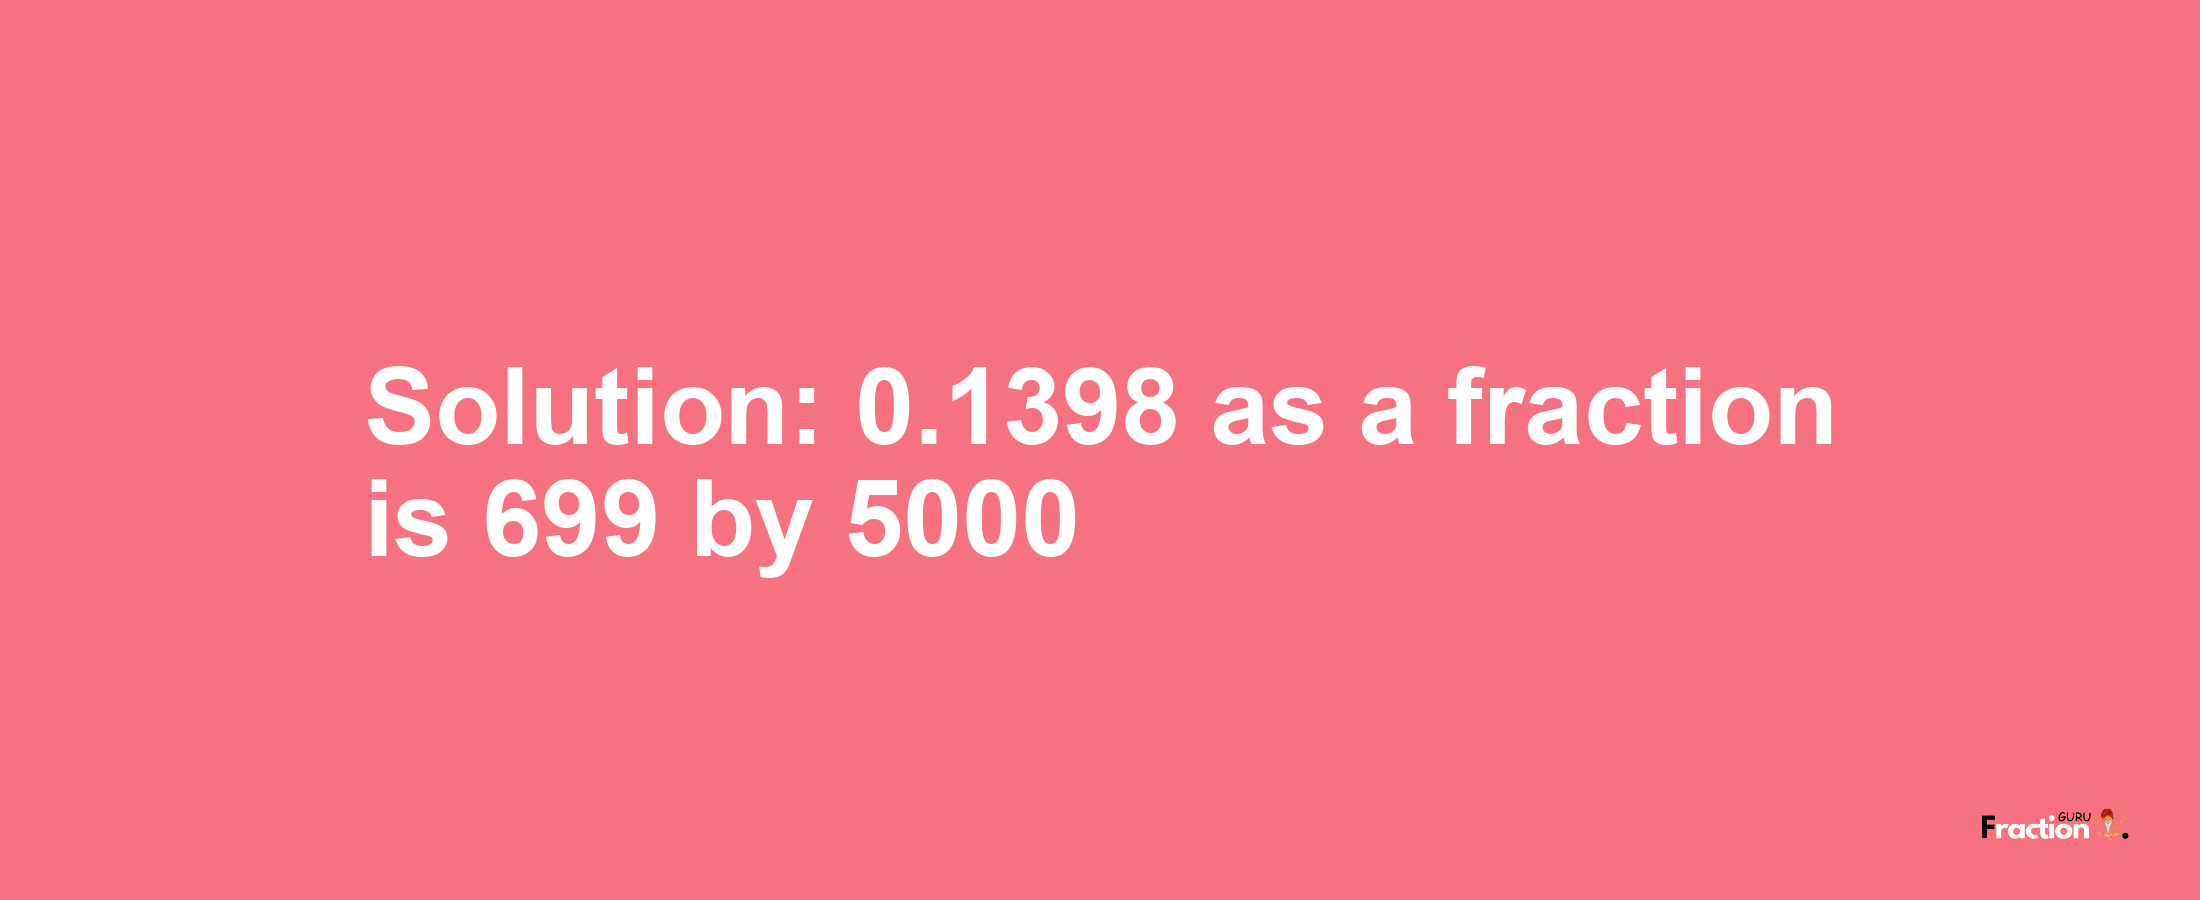 Solution:0.1398 as a fraction is 699/5000